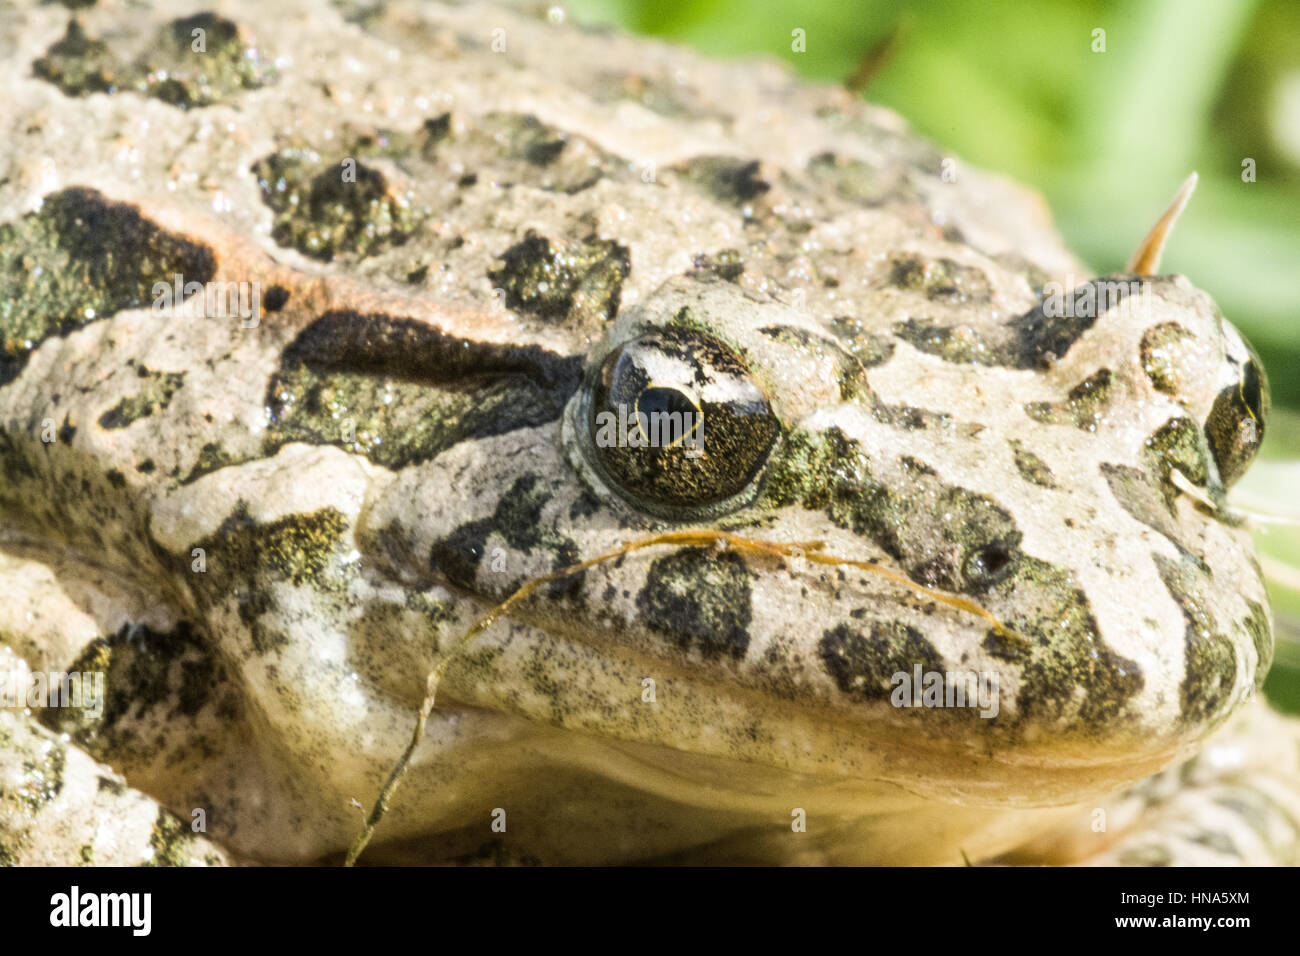 Mediterranean painted frog or simply painted frog, Discoglossus pictus Stock Photo